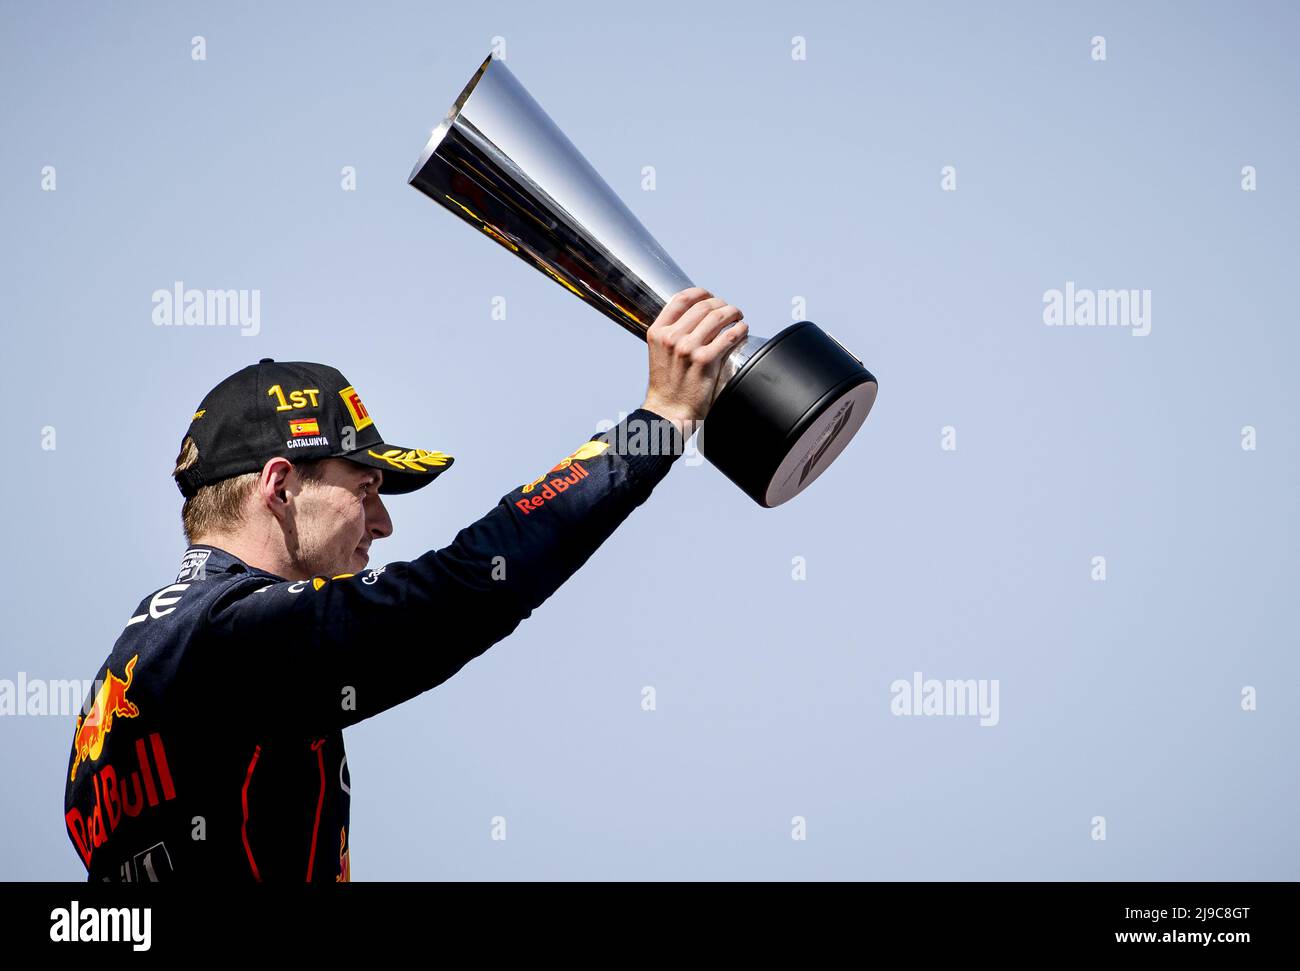 BARCELONA - Max Verstappen (Red Bull Racing) on the podium after the F1 Grand Prix of Spain at Circuit de Barcelona-Catalunya on May 22, 2022 in Barcelona, Spain. REMKO DE WAAL Stock Photo